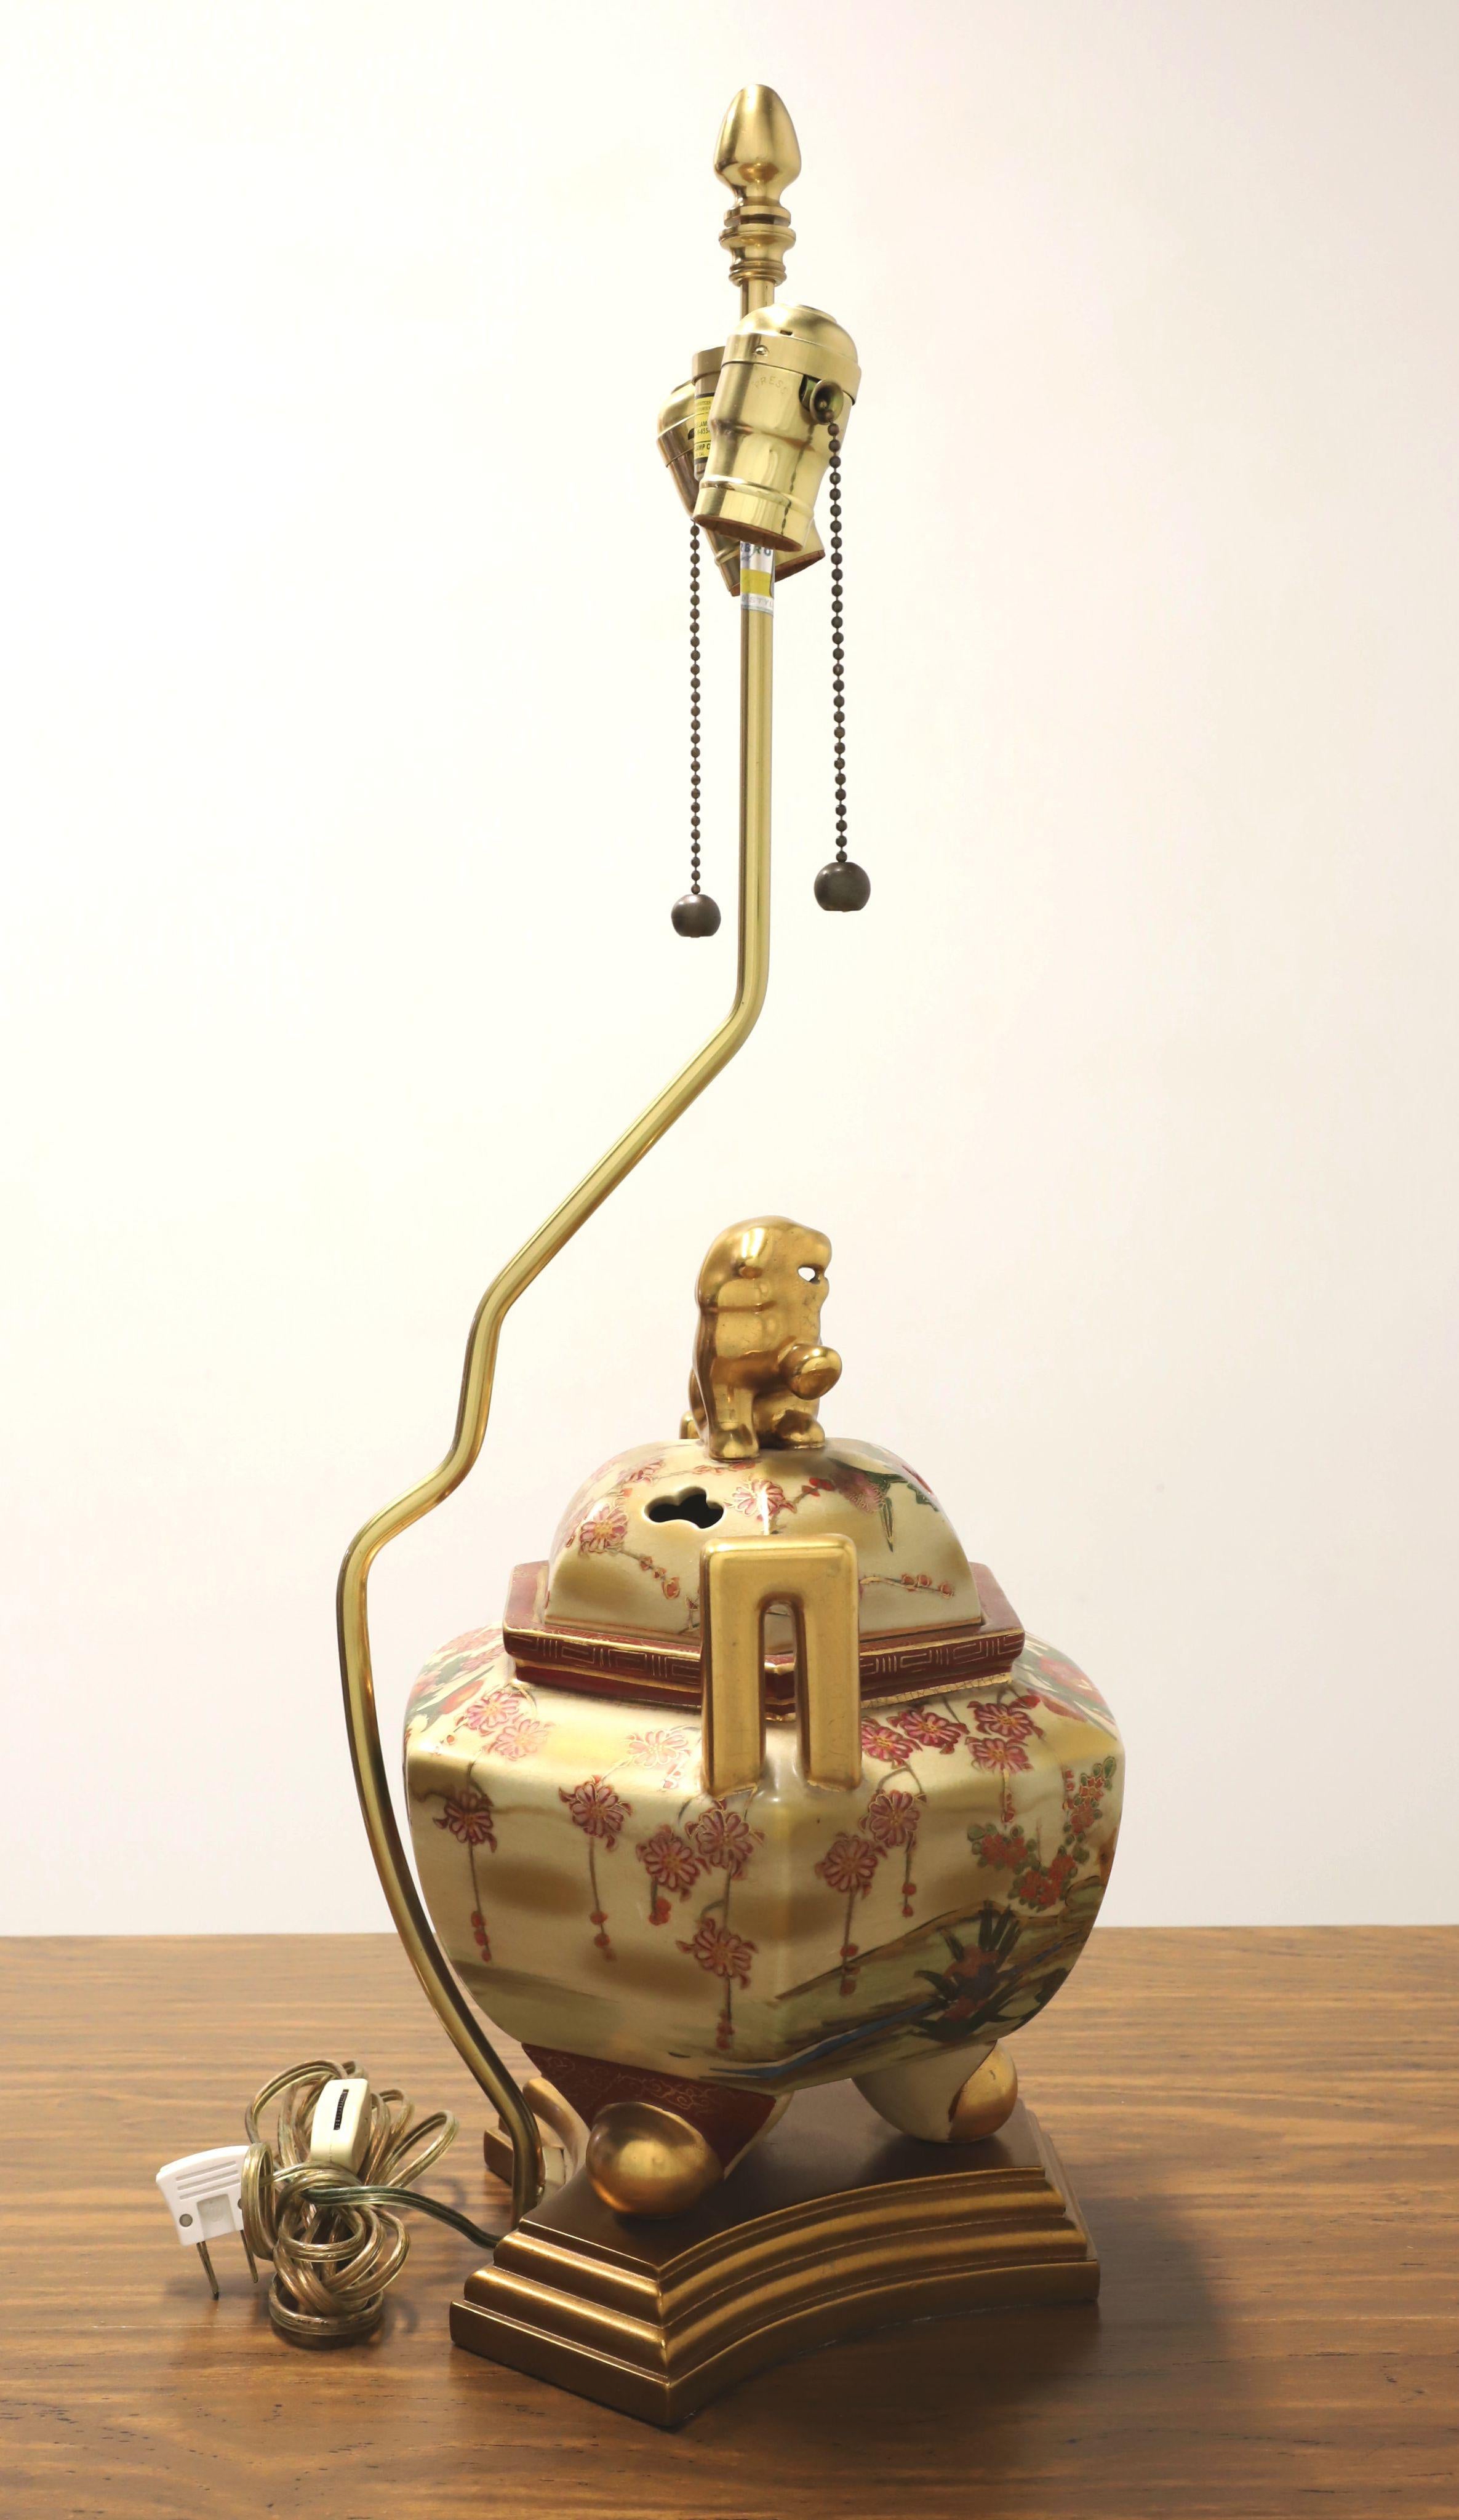 An Asian chinoiserie style table lamp by Marbro Lamp Co. Made of porcelain in an urn style, hand painted with a multi-color chinoiserie scene with gold accents, gold painted handles, gold painted foo dog to top of urn, and on a decorative tiered